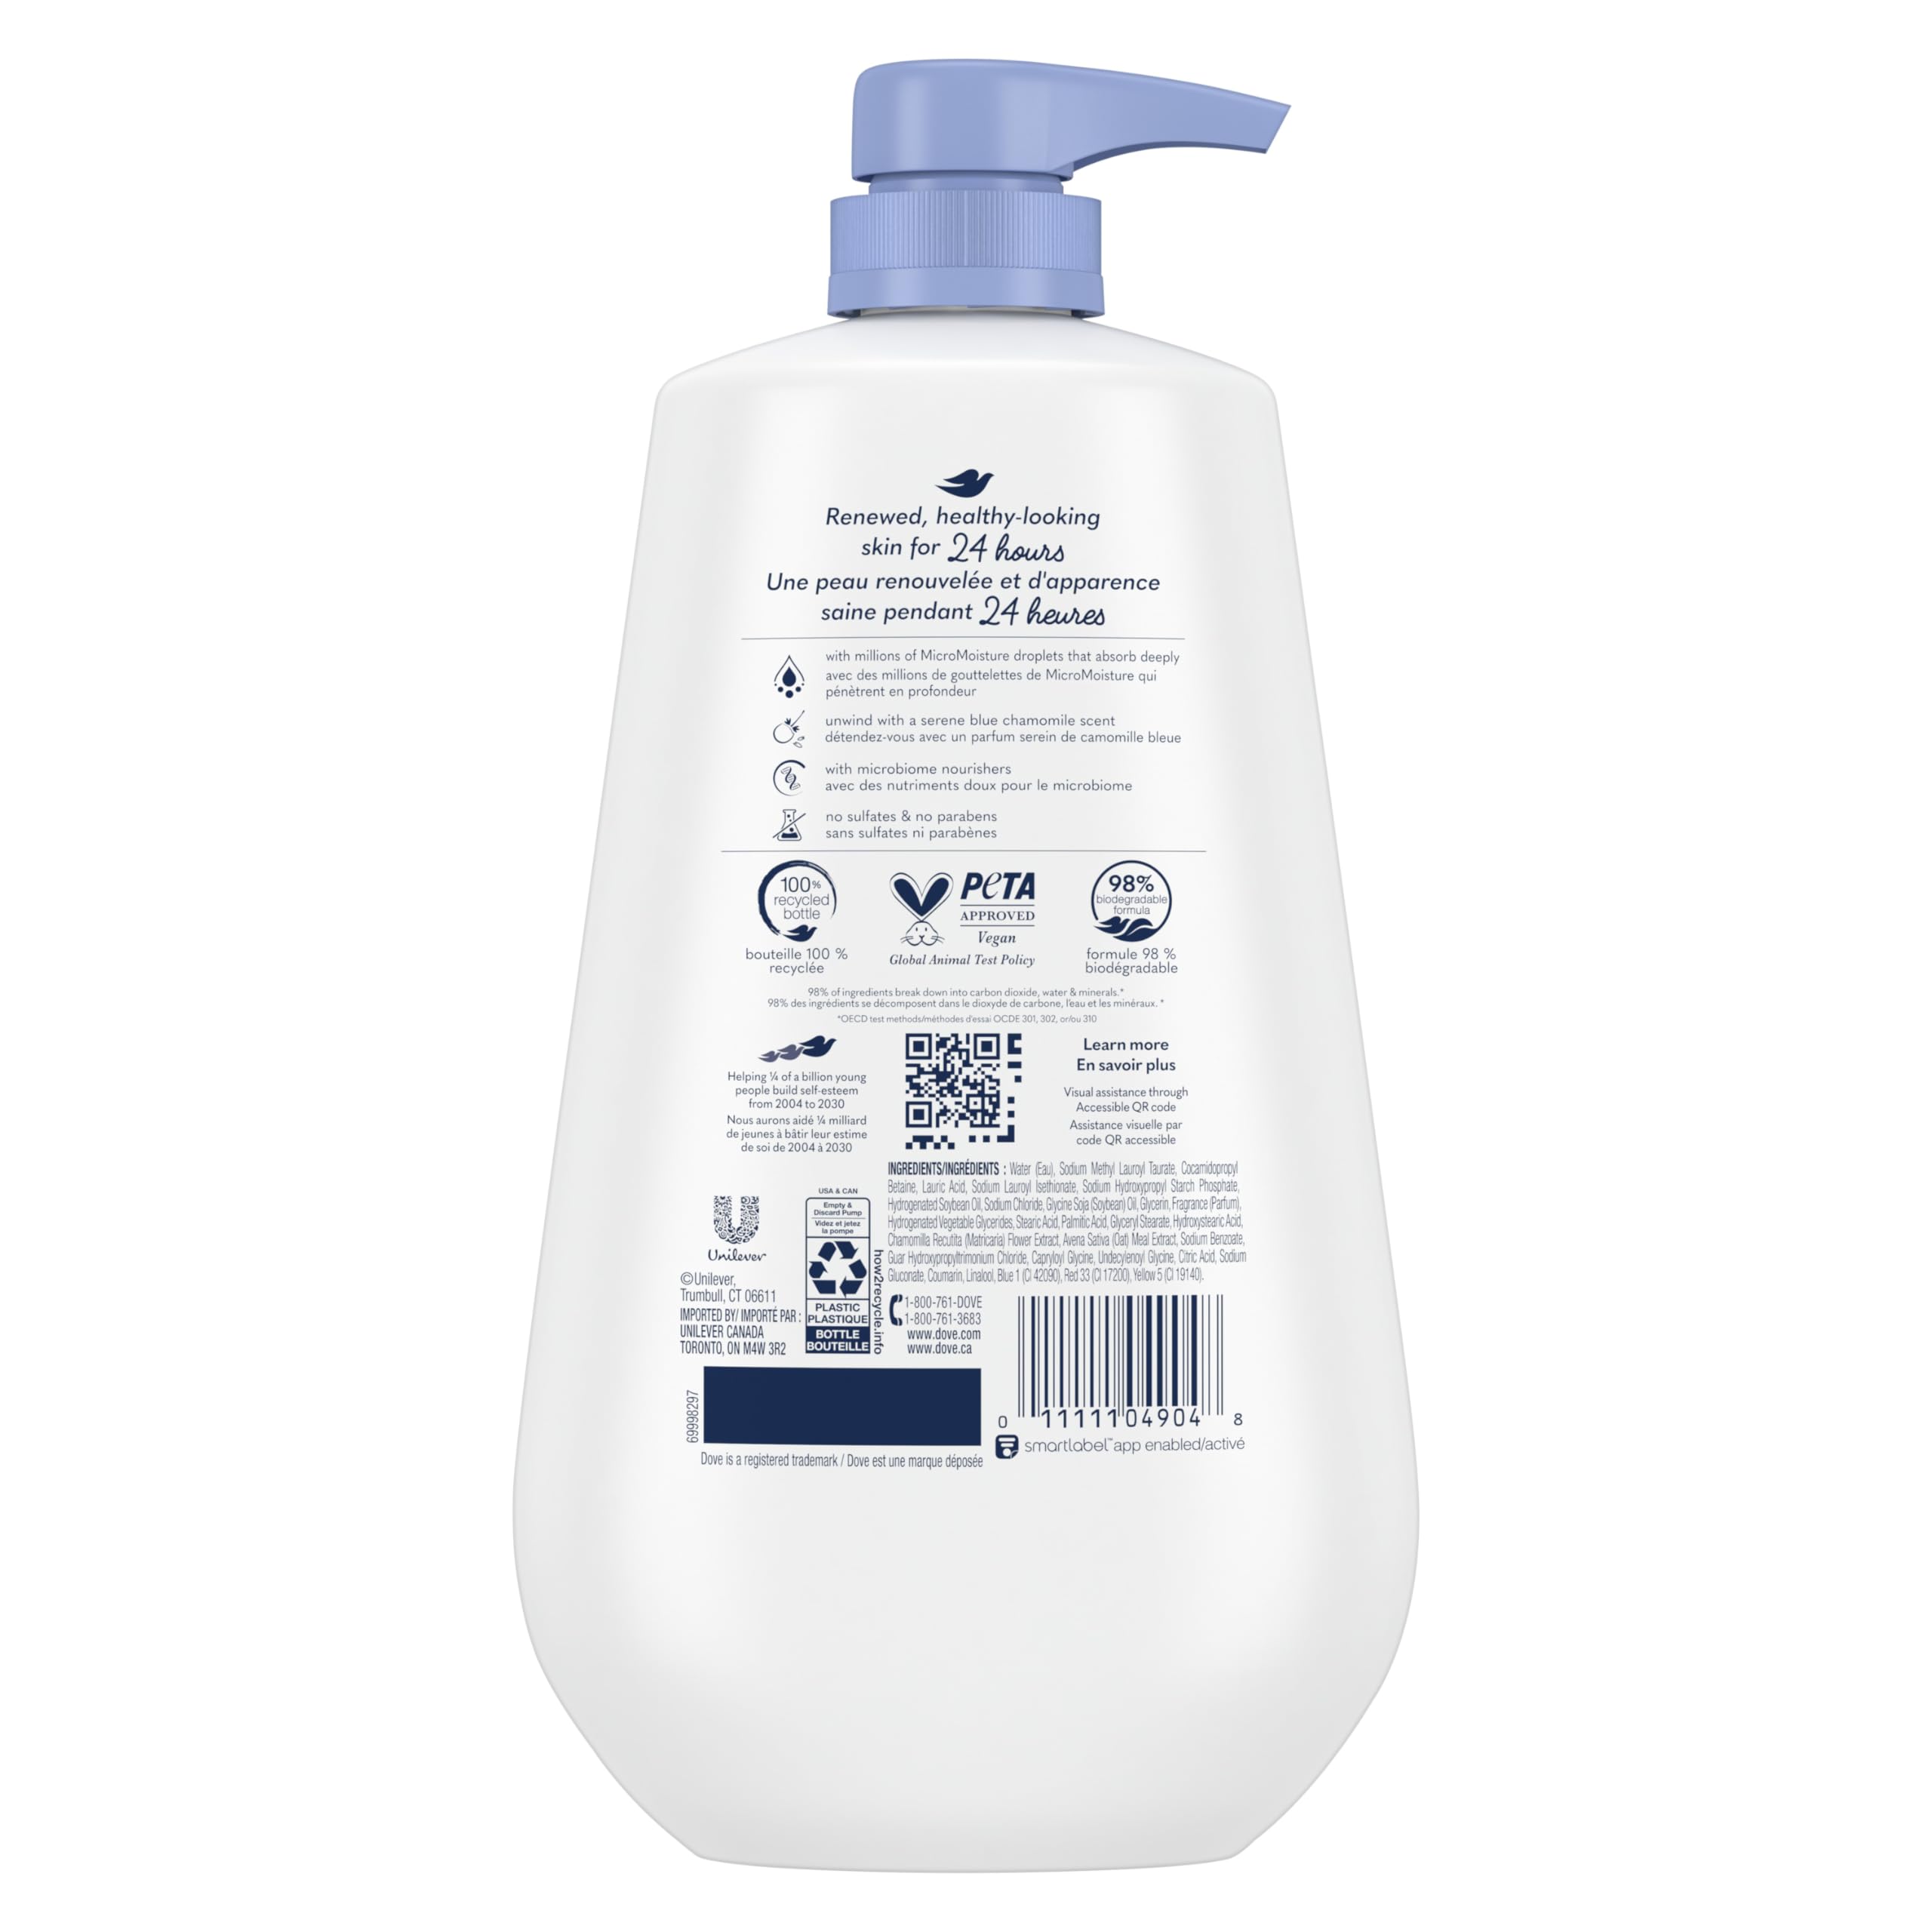 Dove Body Wash with Pump Anti-Stress Blue Chamomile & Oat Milk, 3 Count for Renewed, Healthy Looking Skin, Moisturizing Gentle Skin Cleanser with 24hr Renewing MicroMoisture, 30.6 oz